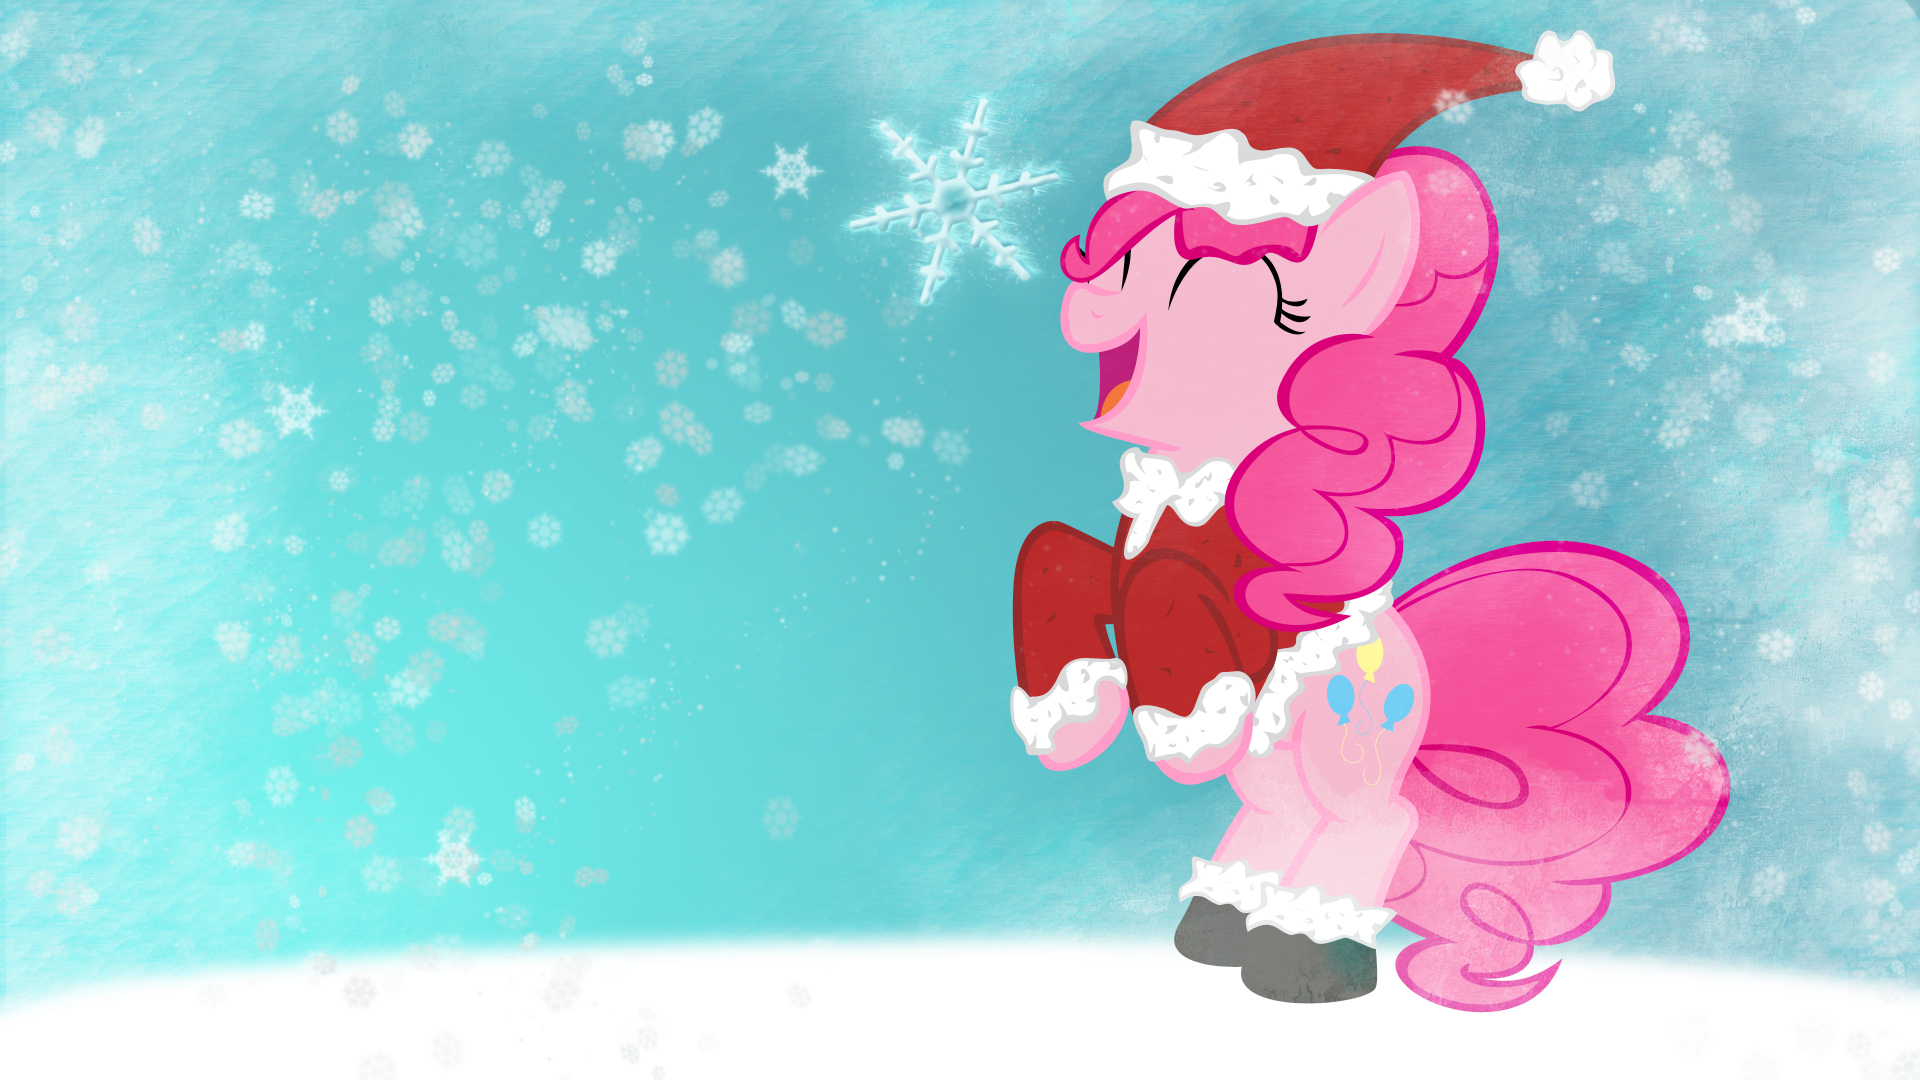 Pinkie Pie Christmas Wallpaper by LVGCombine and PhantomBadger